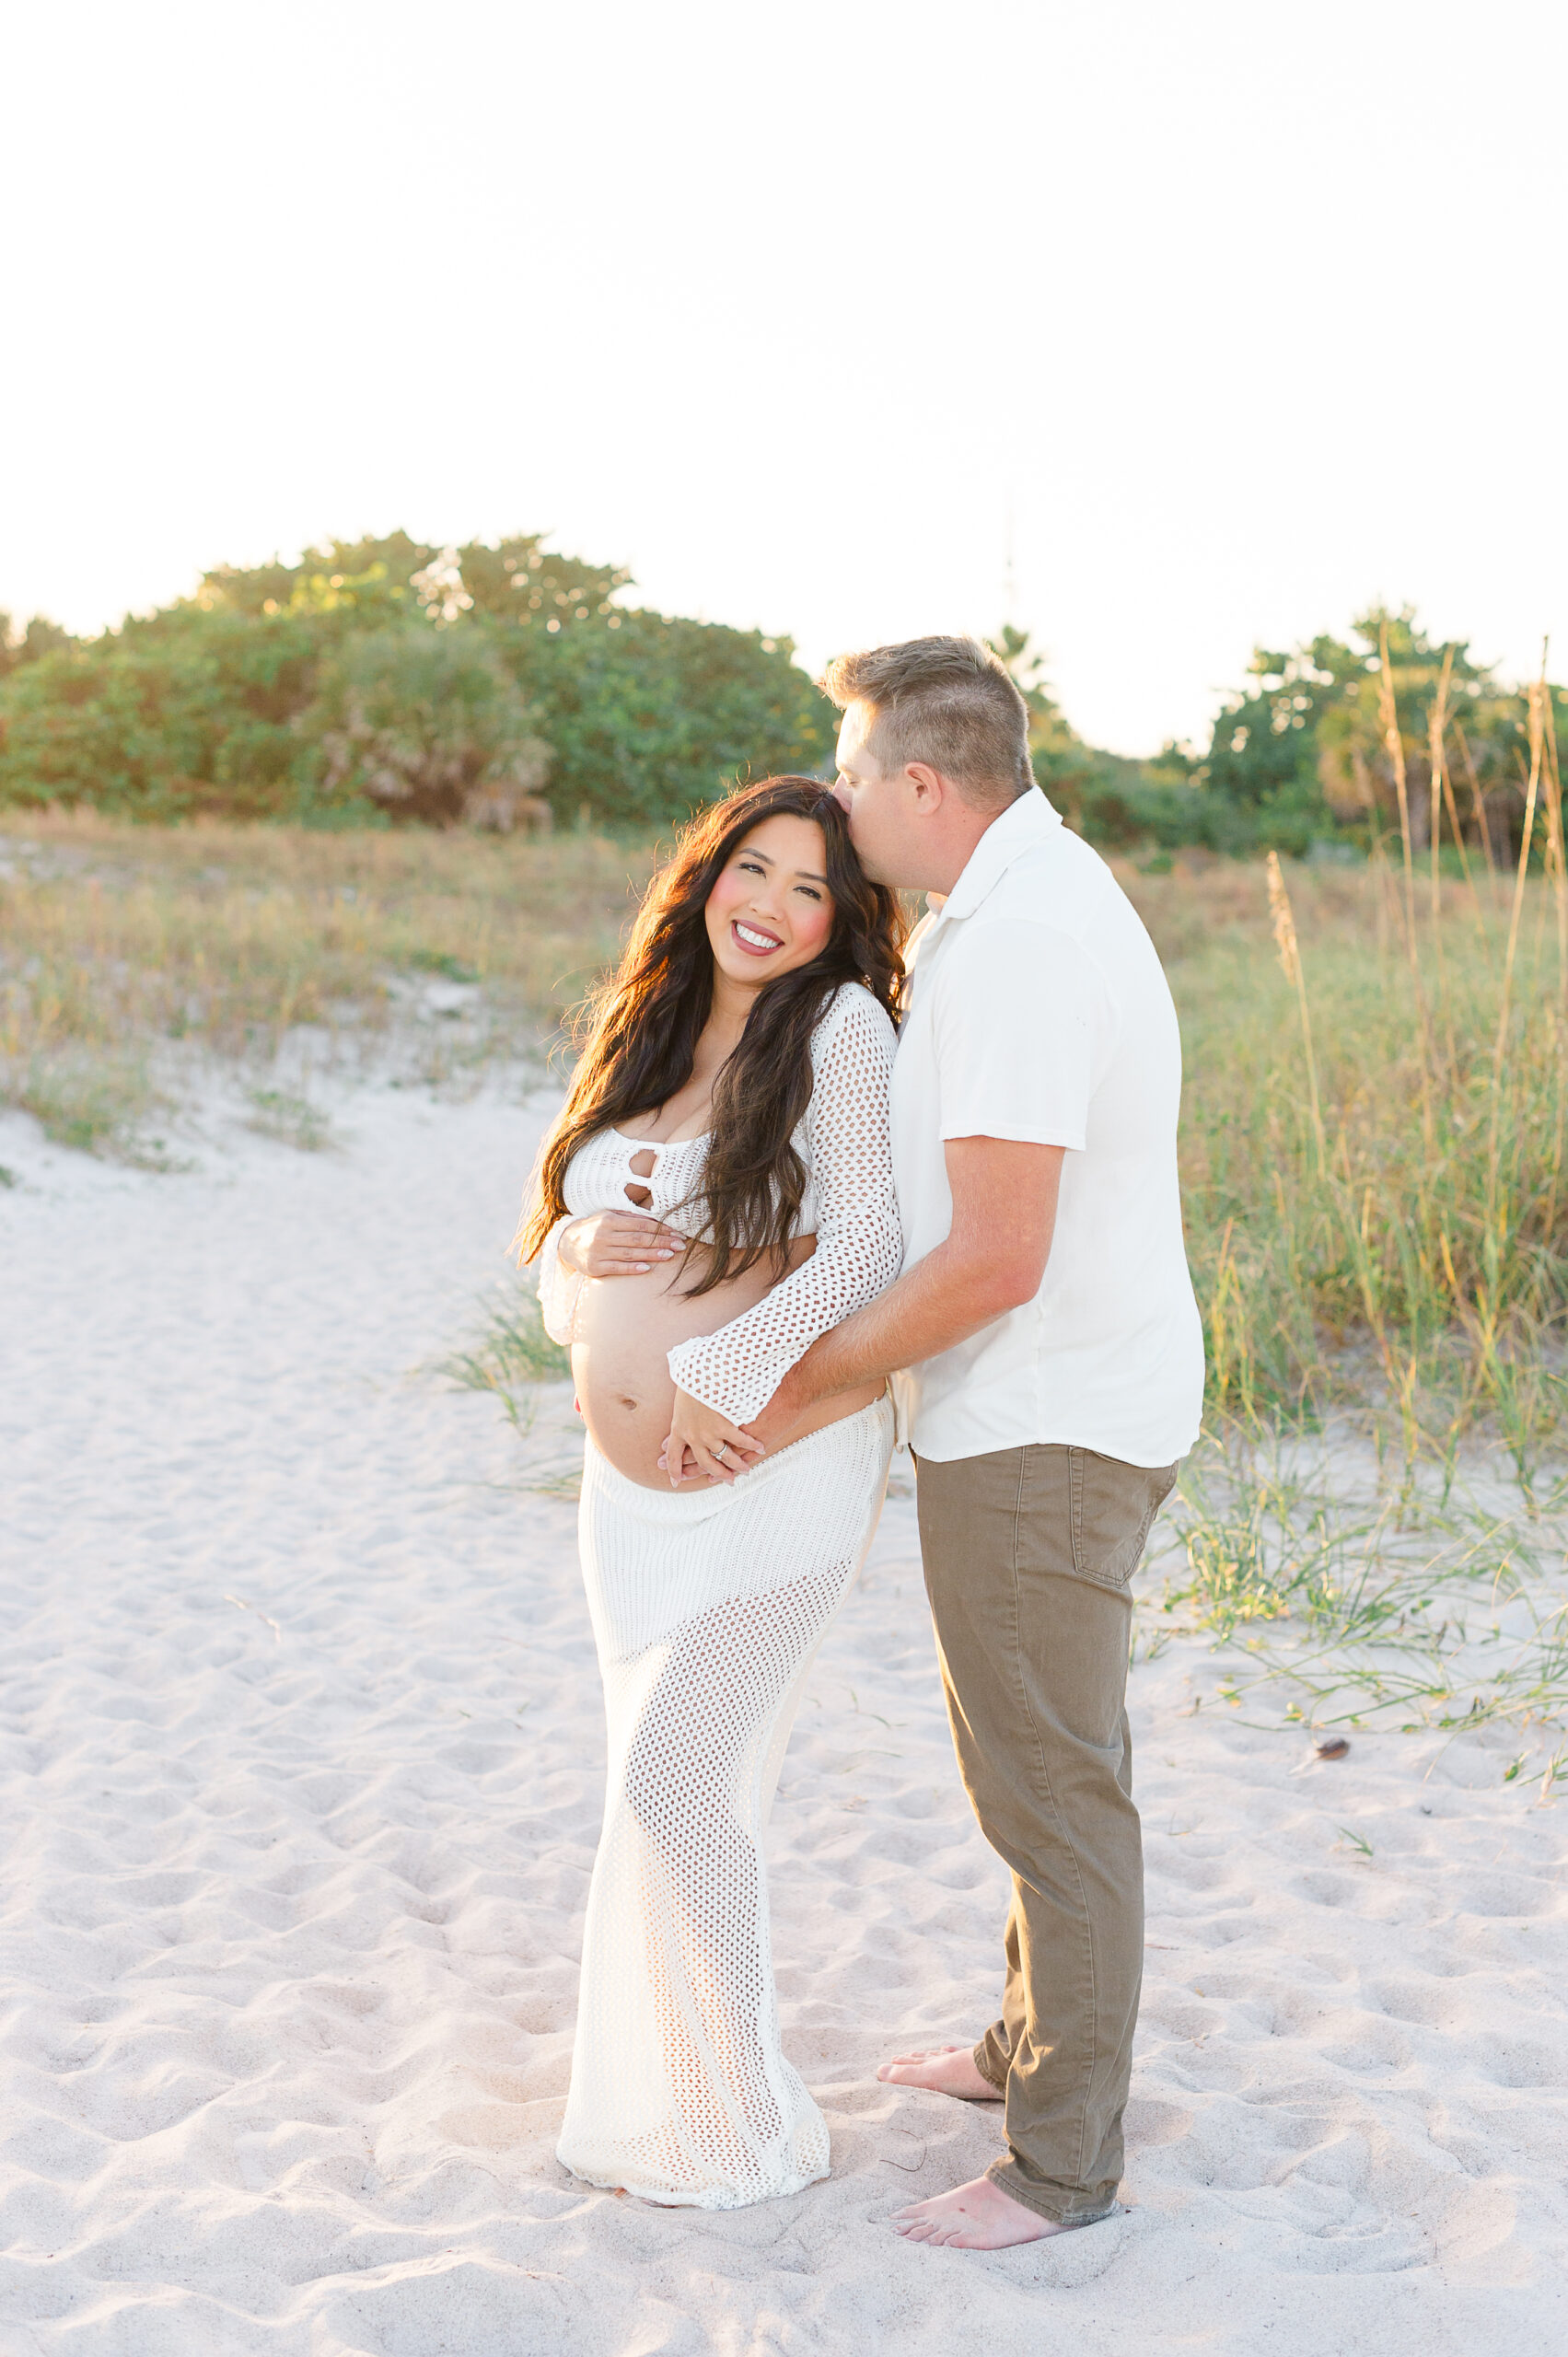 Expectant parents stand on the beach at sunset holding each other while dad kisses moms temple and they hold her pregnant belly.